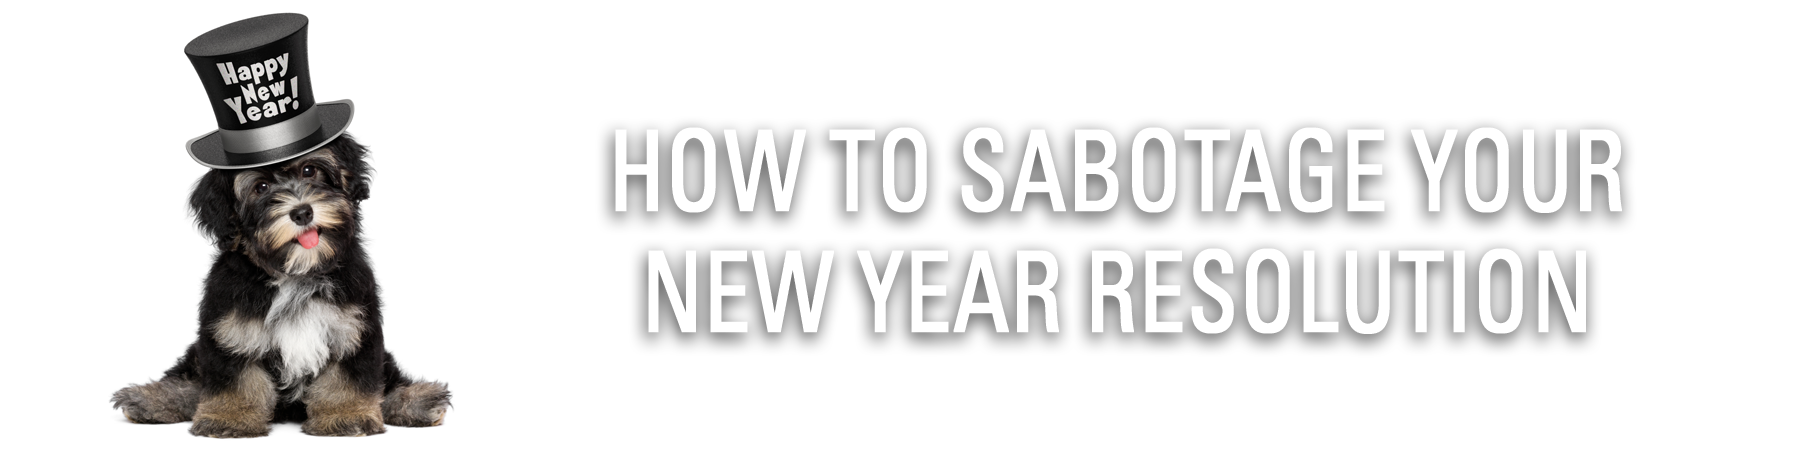 How To Sabotage Your New Year Resolution